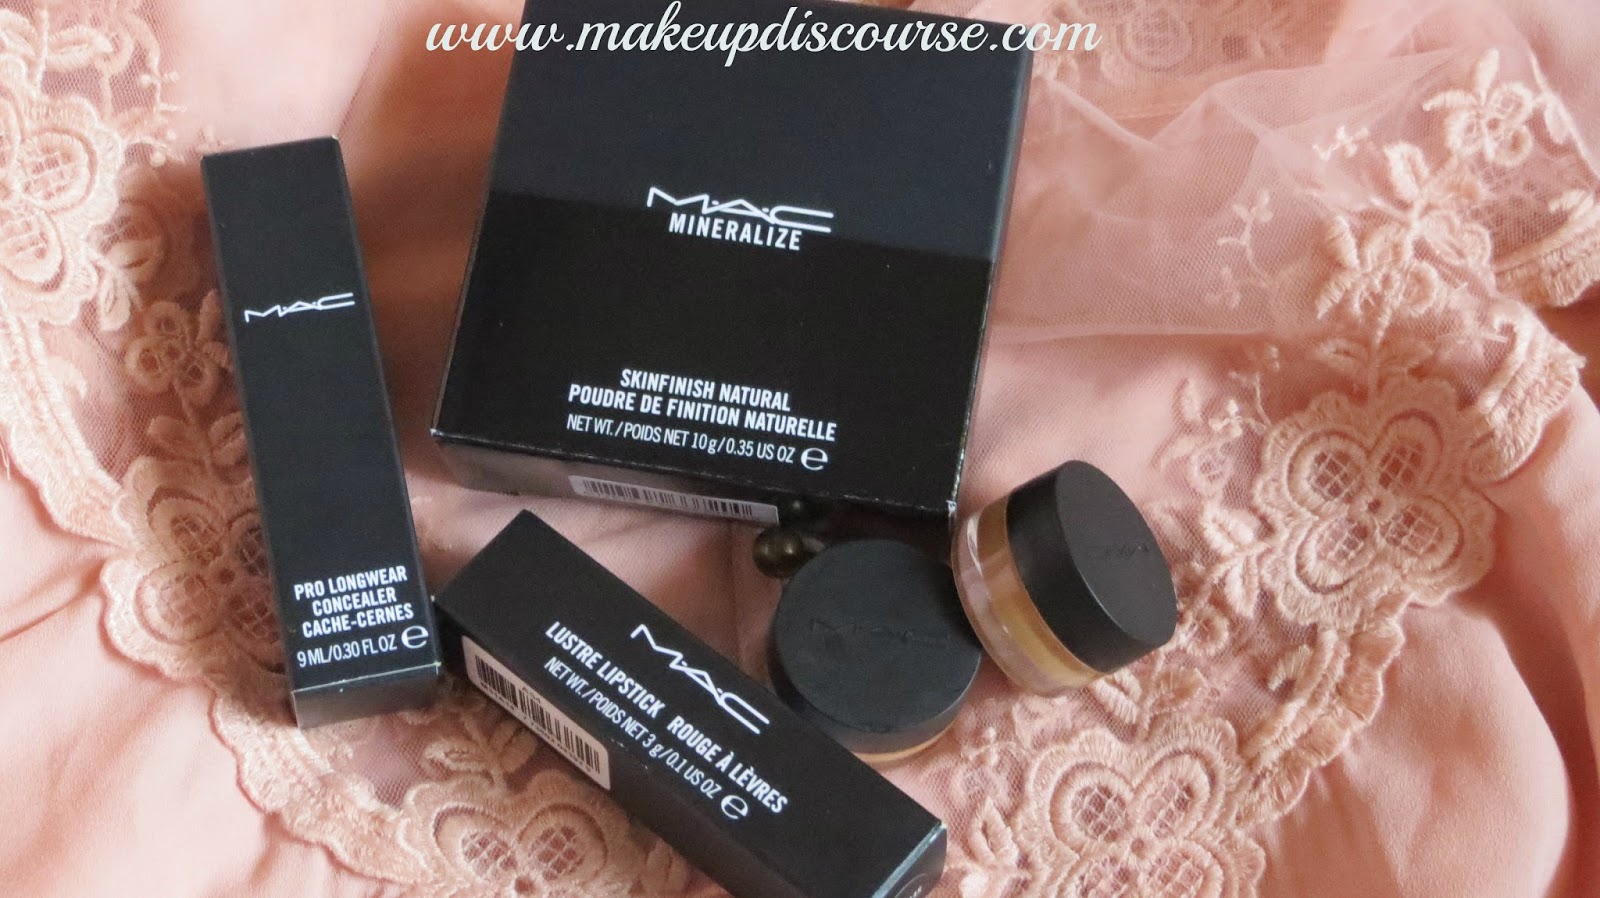 MAC Lipstick See Sheer, MAC Prolong Wear Concealer NW40, MAC Mineralize Skin Finish Natural Price in India